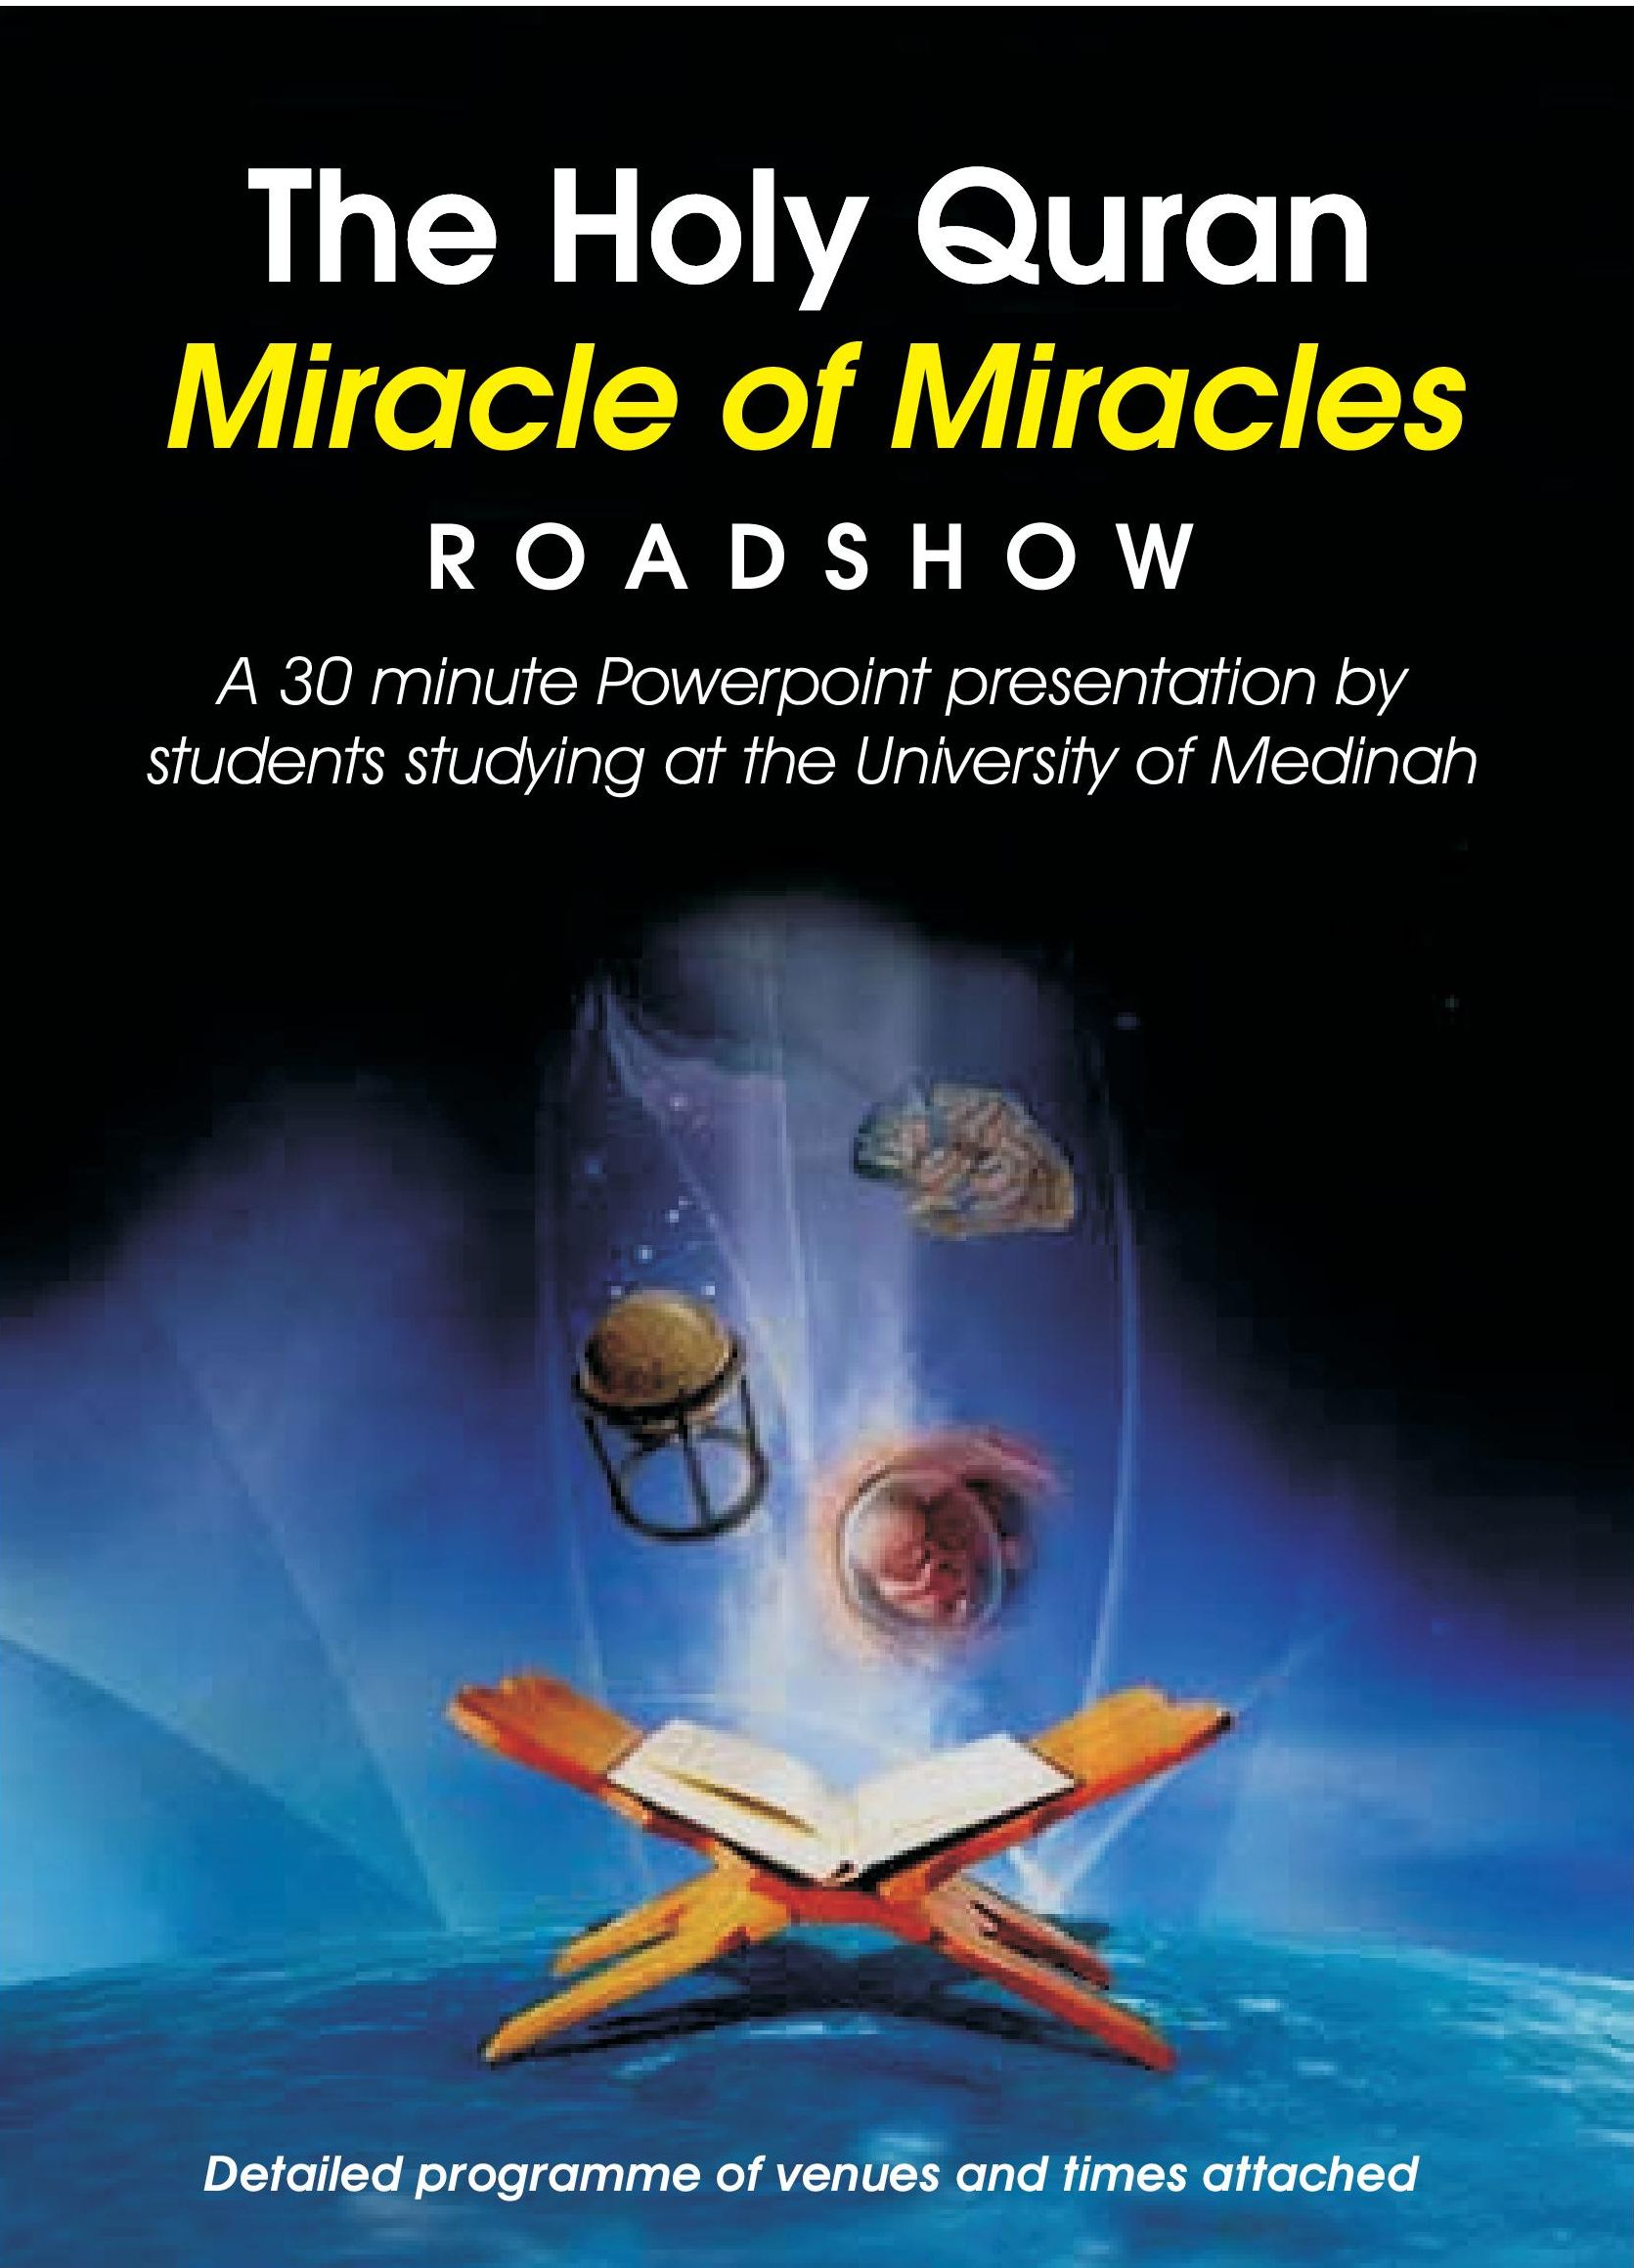 The Holy Quran, Miracle of Miracles – Roadshow